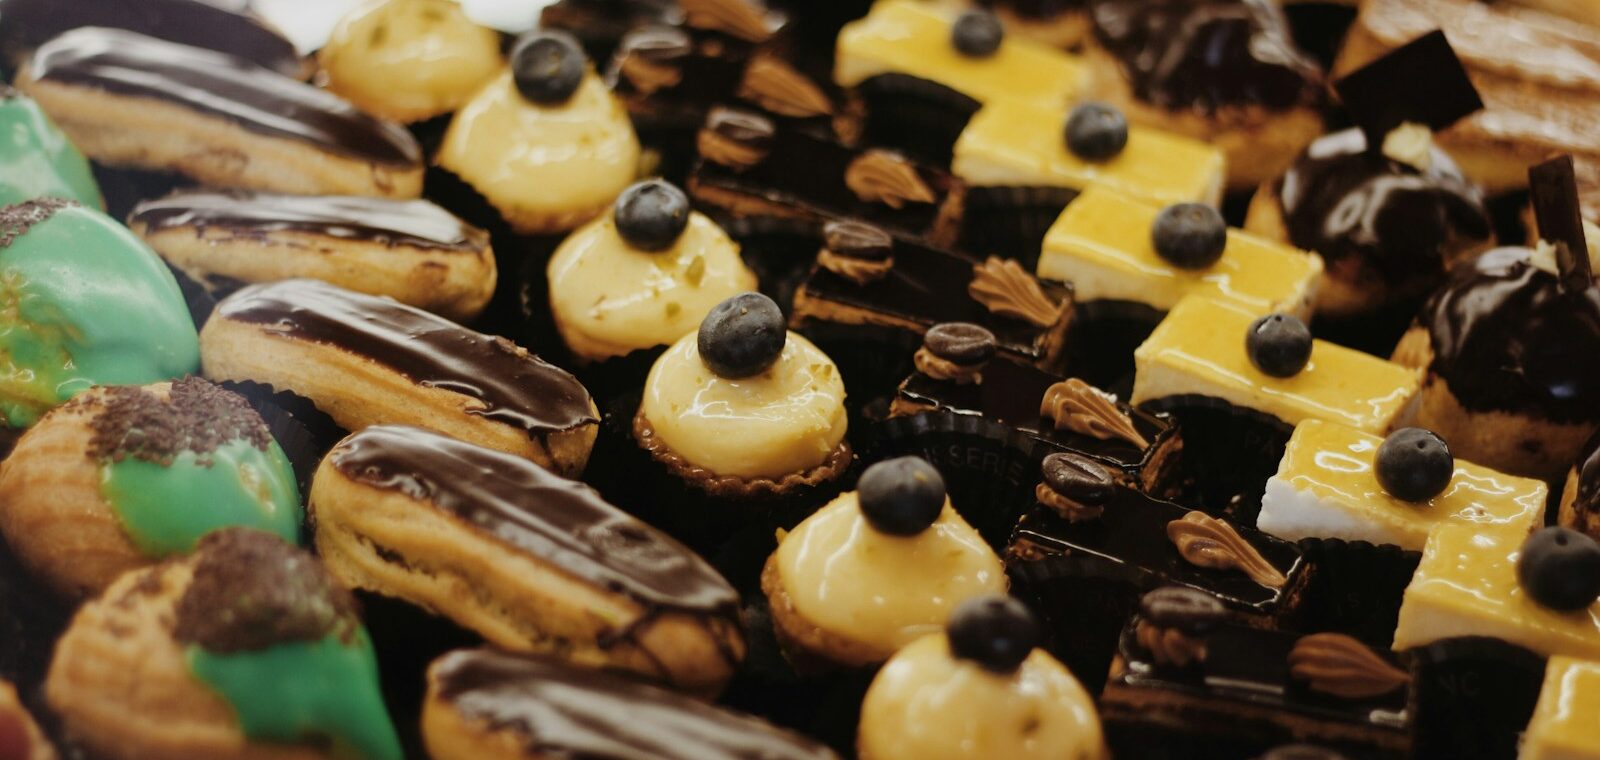 a close up of a tray of cookies and pastries